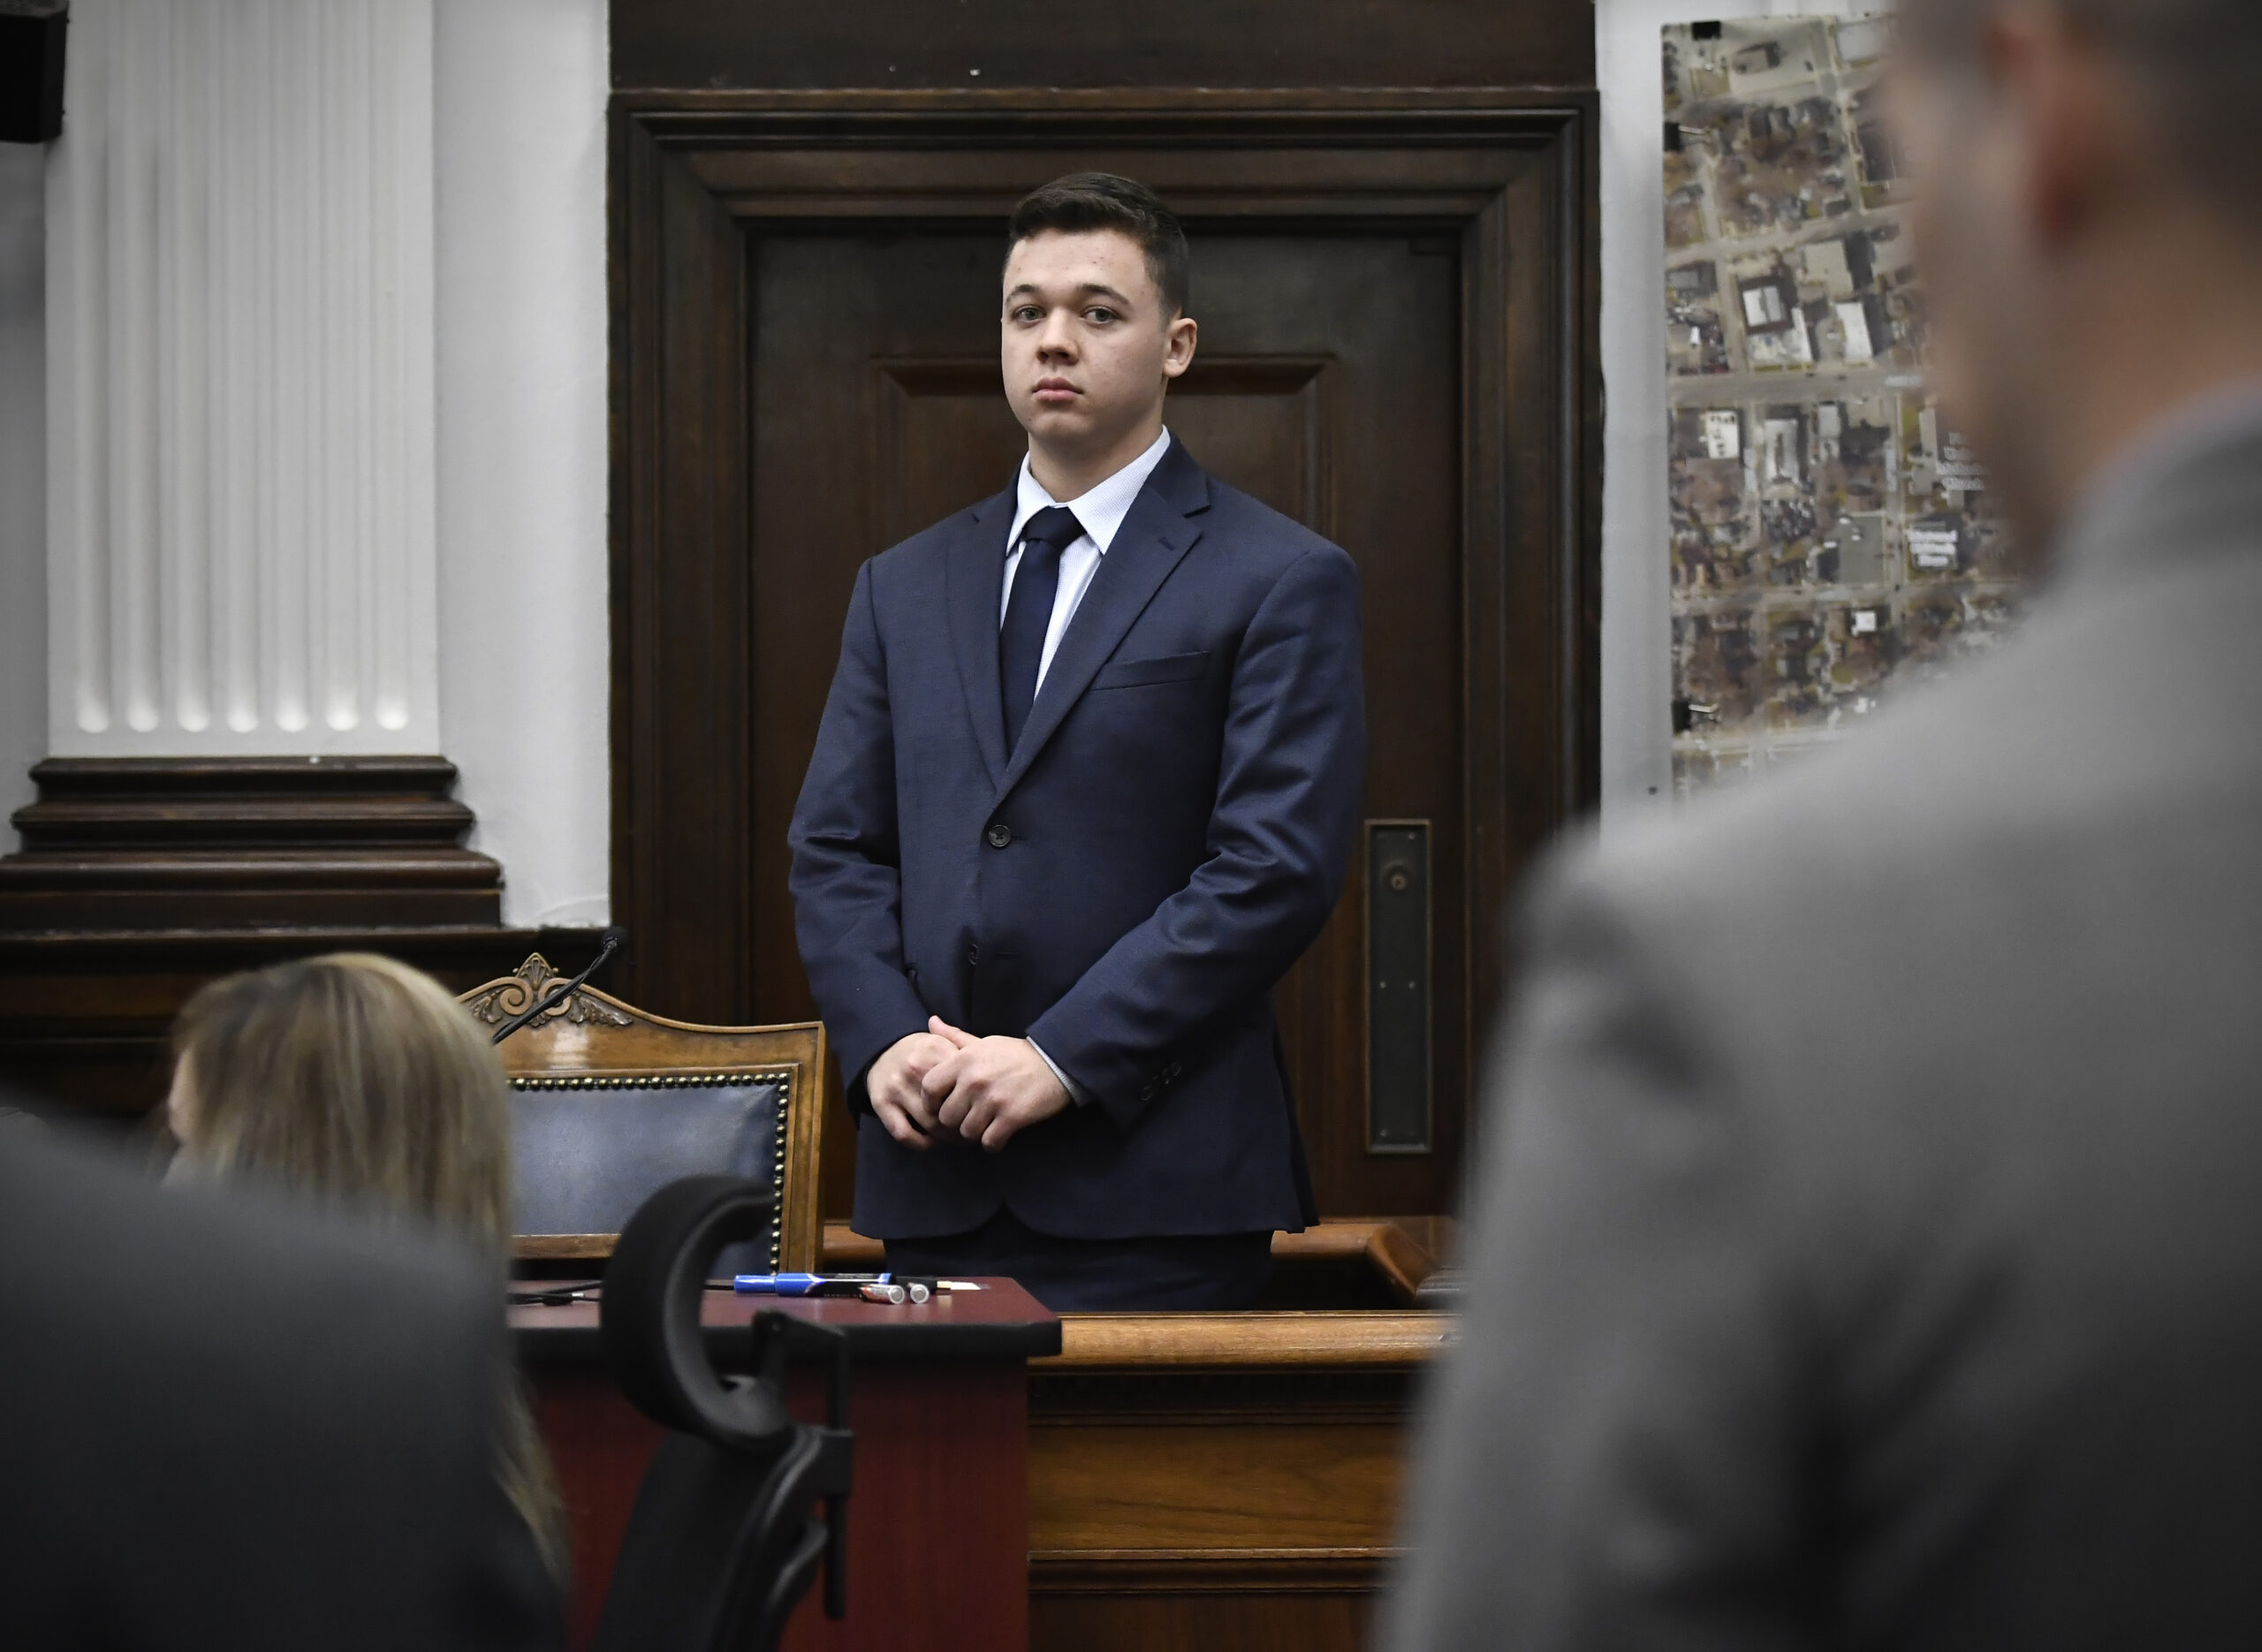 Kyle Rittenhouse waits for the jury to enter the room to continue testifying during his trial at the Kenosha County Courthouse in Kenosha, Wis., on Wednesday, Nov. 10, 2021. Rittenhouse is accused of killing two people and wounding a third during a protest over police brutality in Kenosha, last year. (Sean Krajacic/The Kenosha News via AP, Pool)